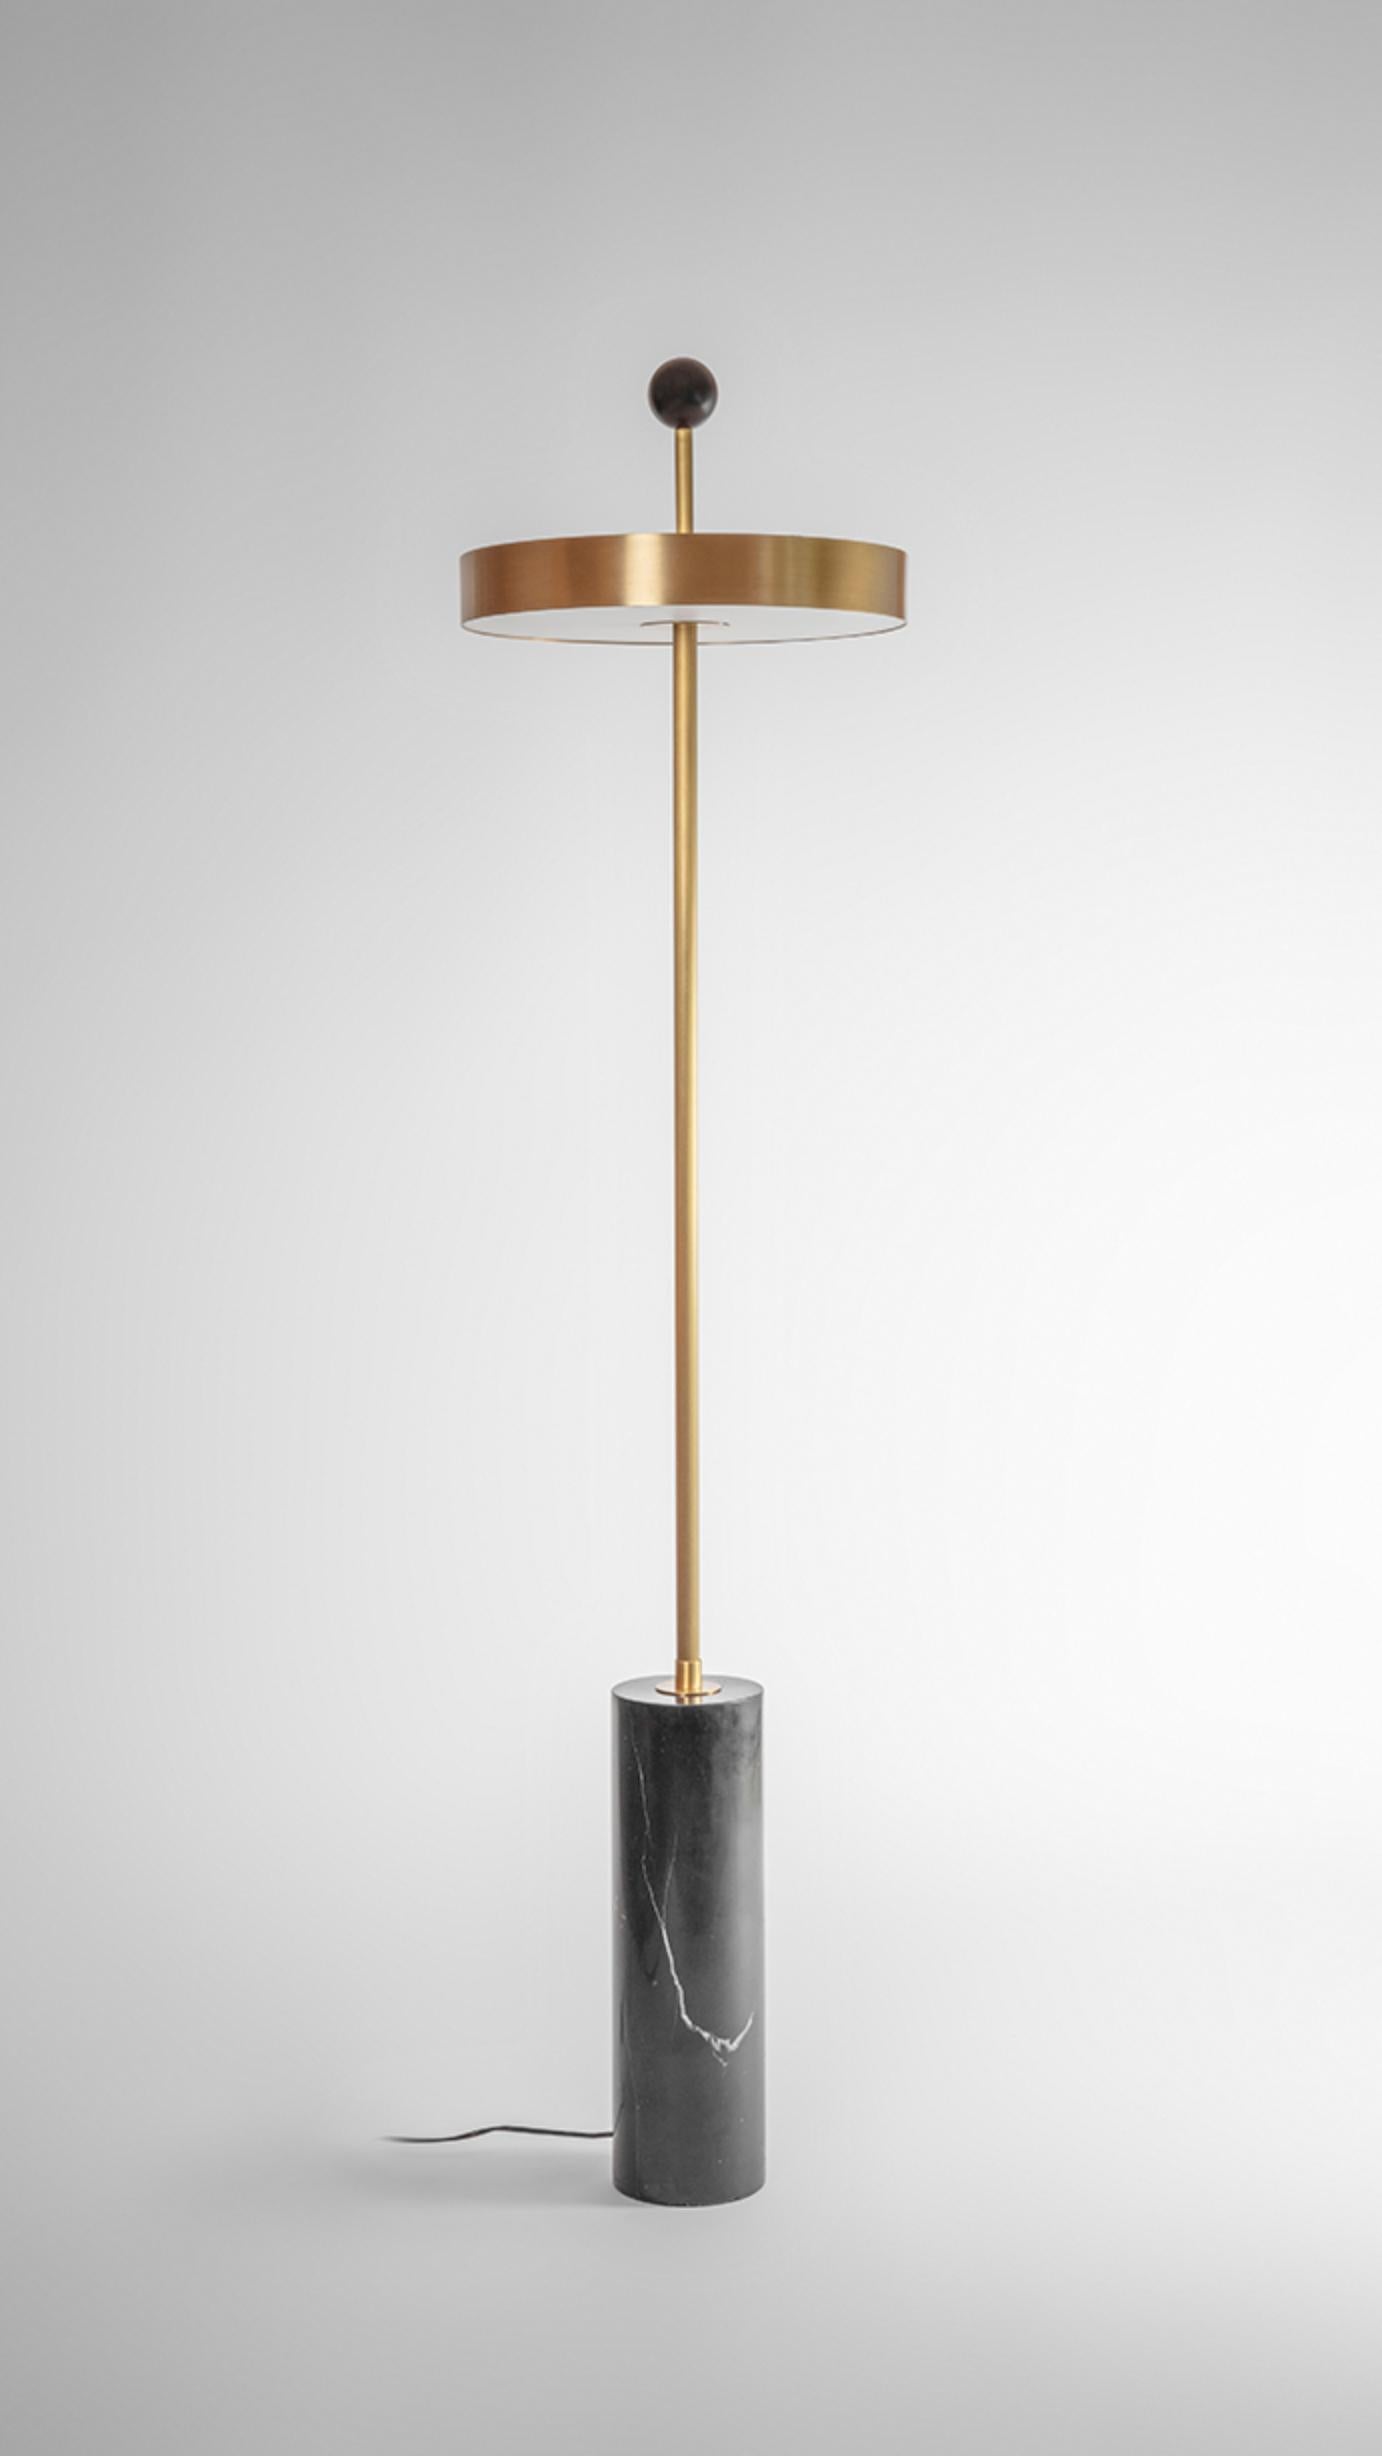 Disc and ball floor lamp by square in circle
Dimensions: H 165 x W 40 cm
Materials: brushed brass finish, black marble, powder coated black, opaque white acrylic diffuser

A statement floor lamp with a disc-shaped shade, allowing the light to